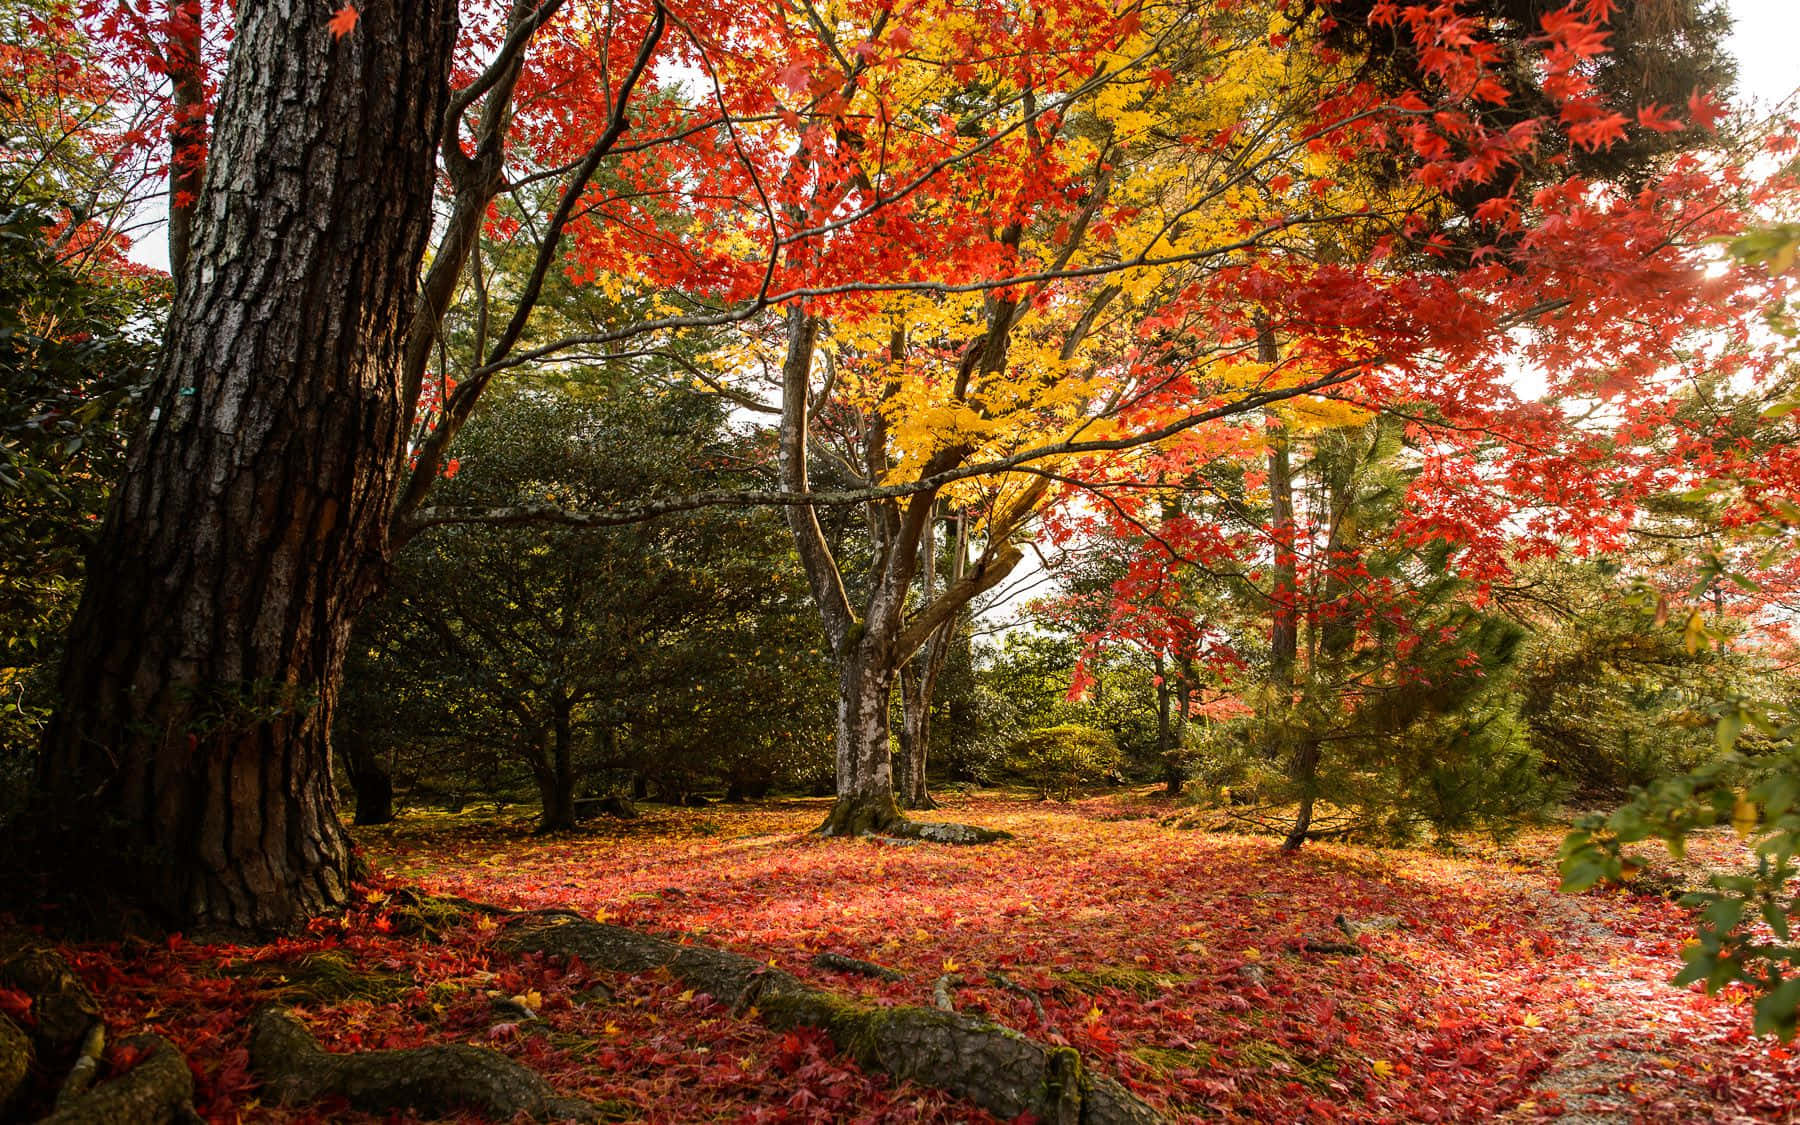 Take in the beauty of fall with this colorful autumn landscape Wallpaper